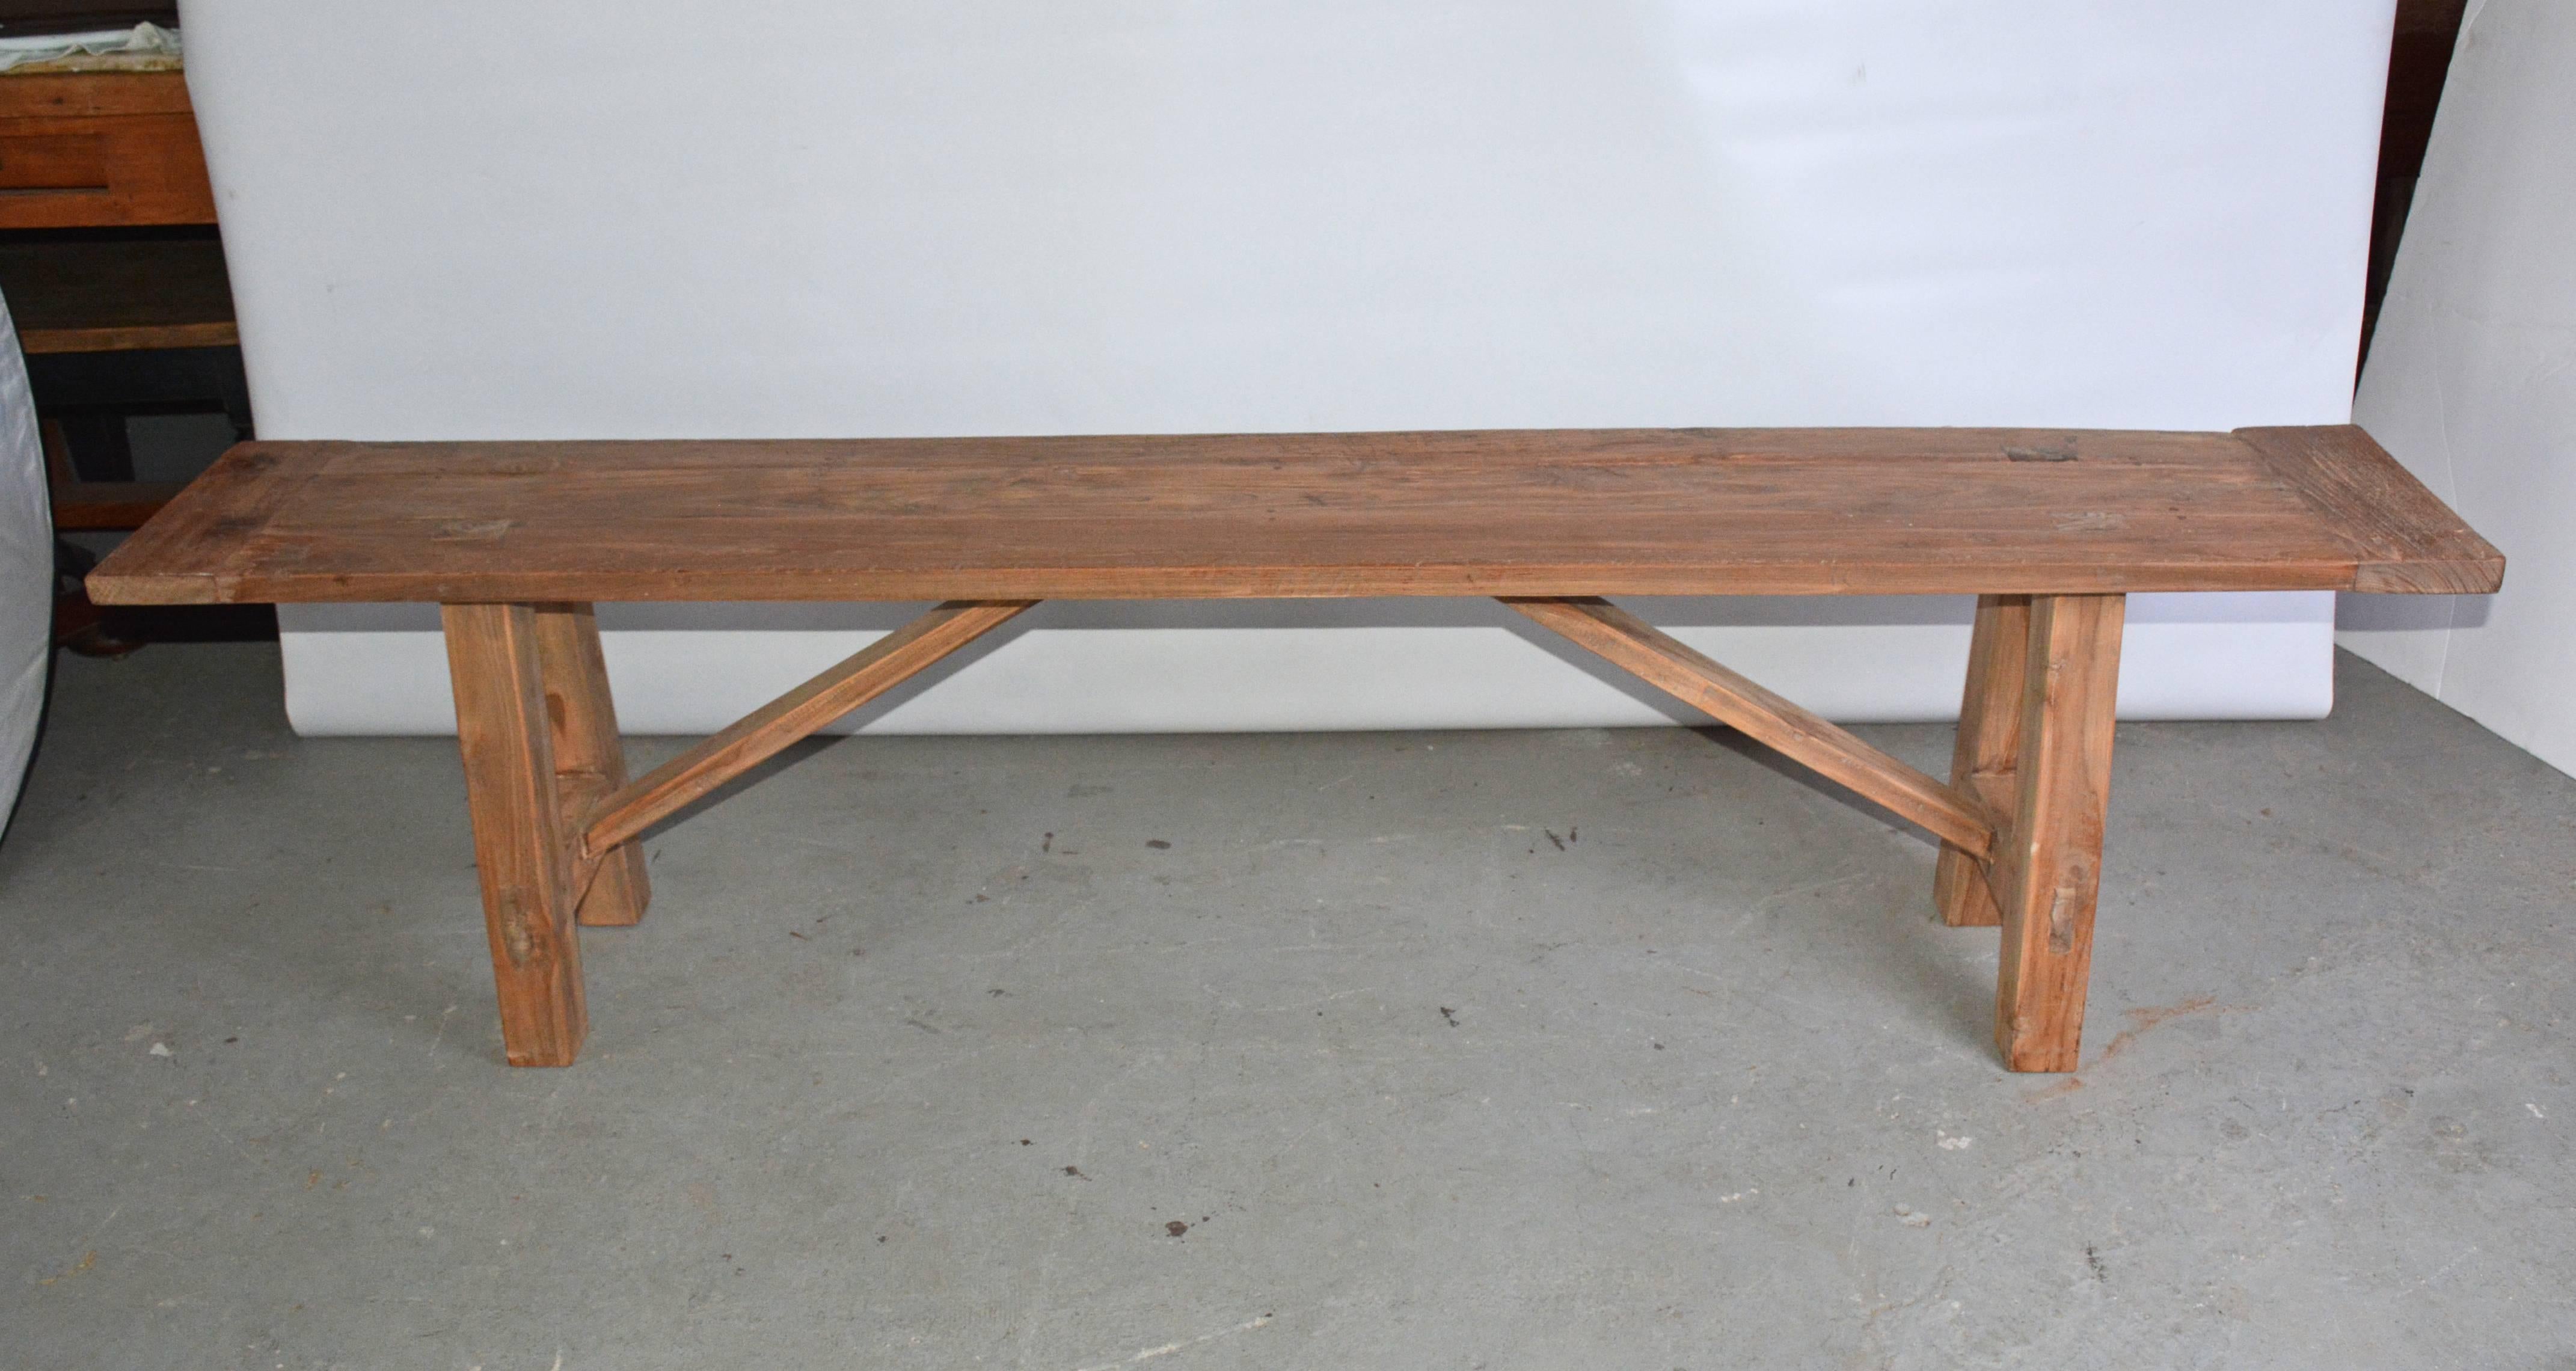 The rustic teak bench has splayed legs pegged into the breadboard top, stretchers and angled supports. Great as garden or porch dining seating.